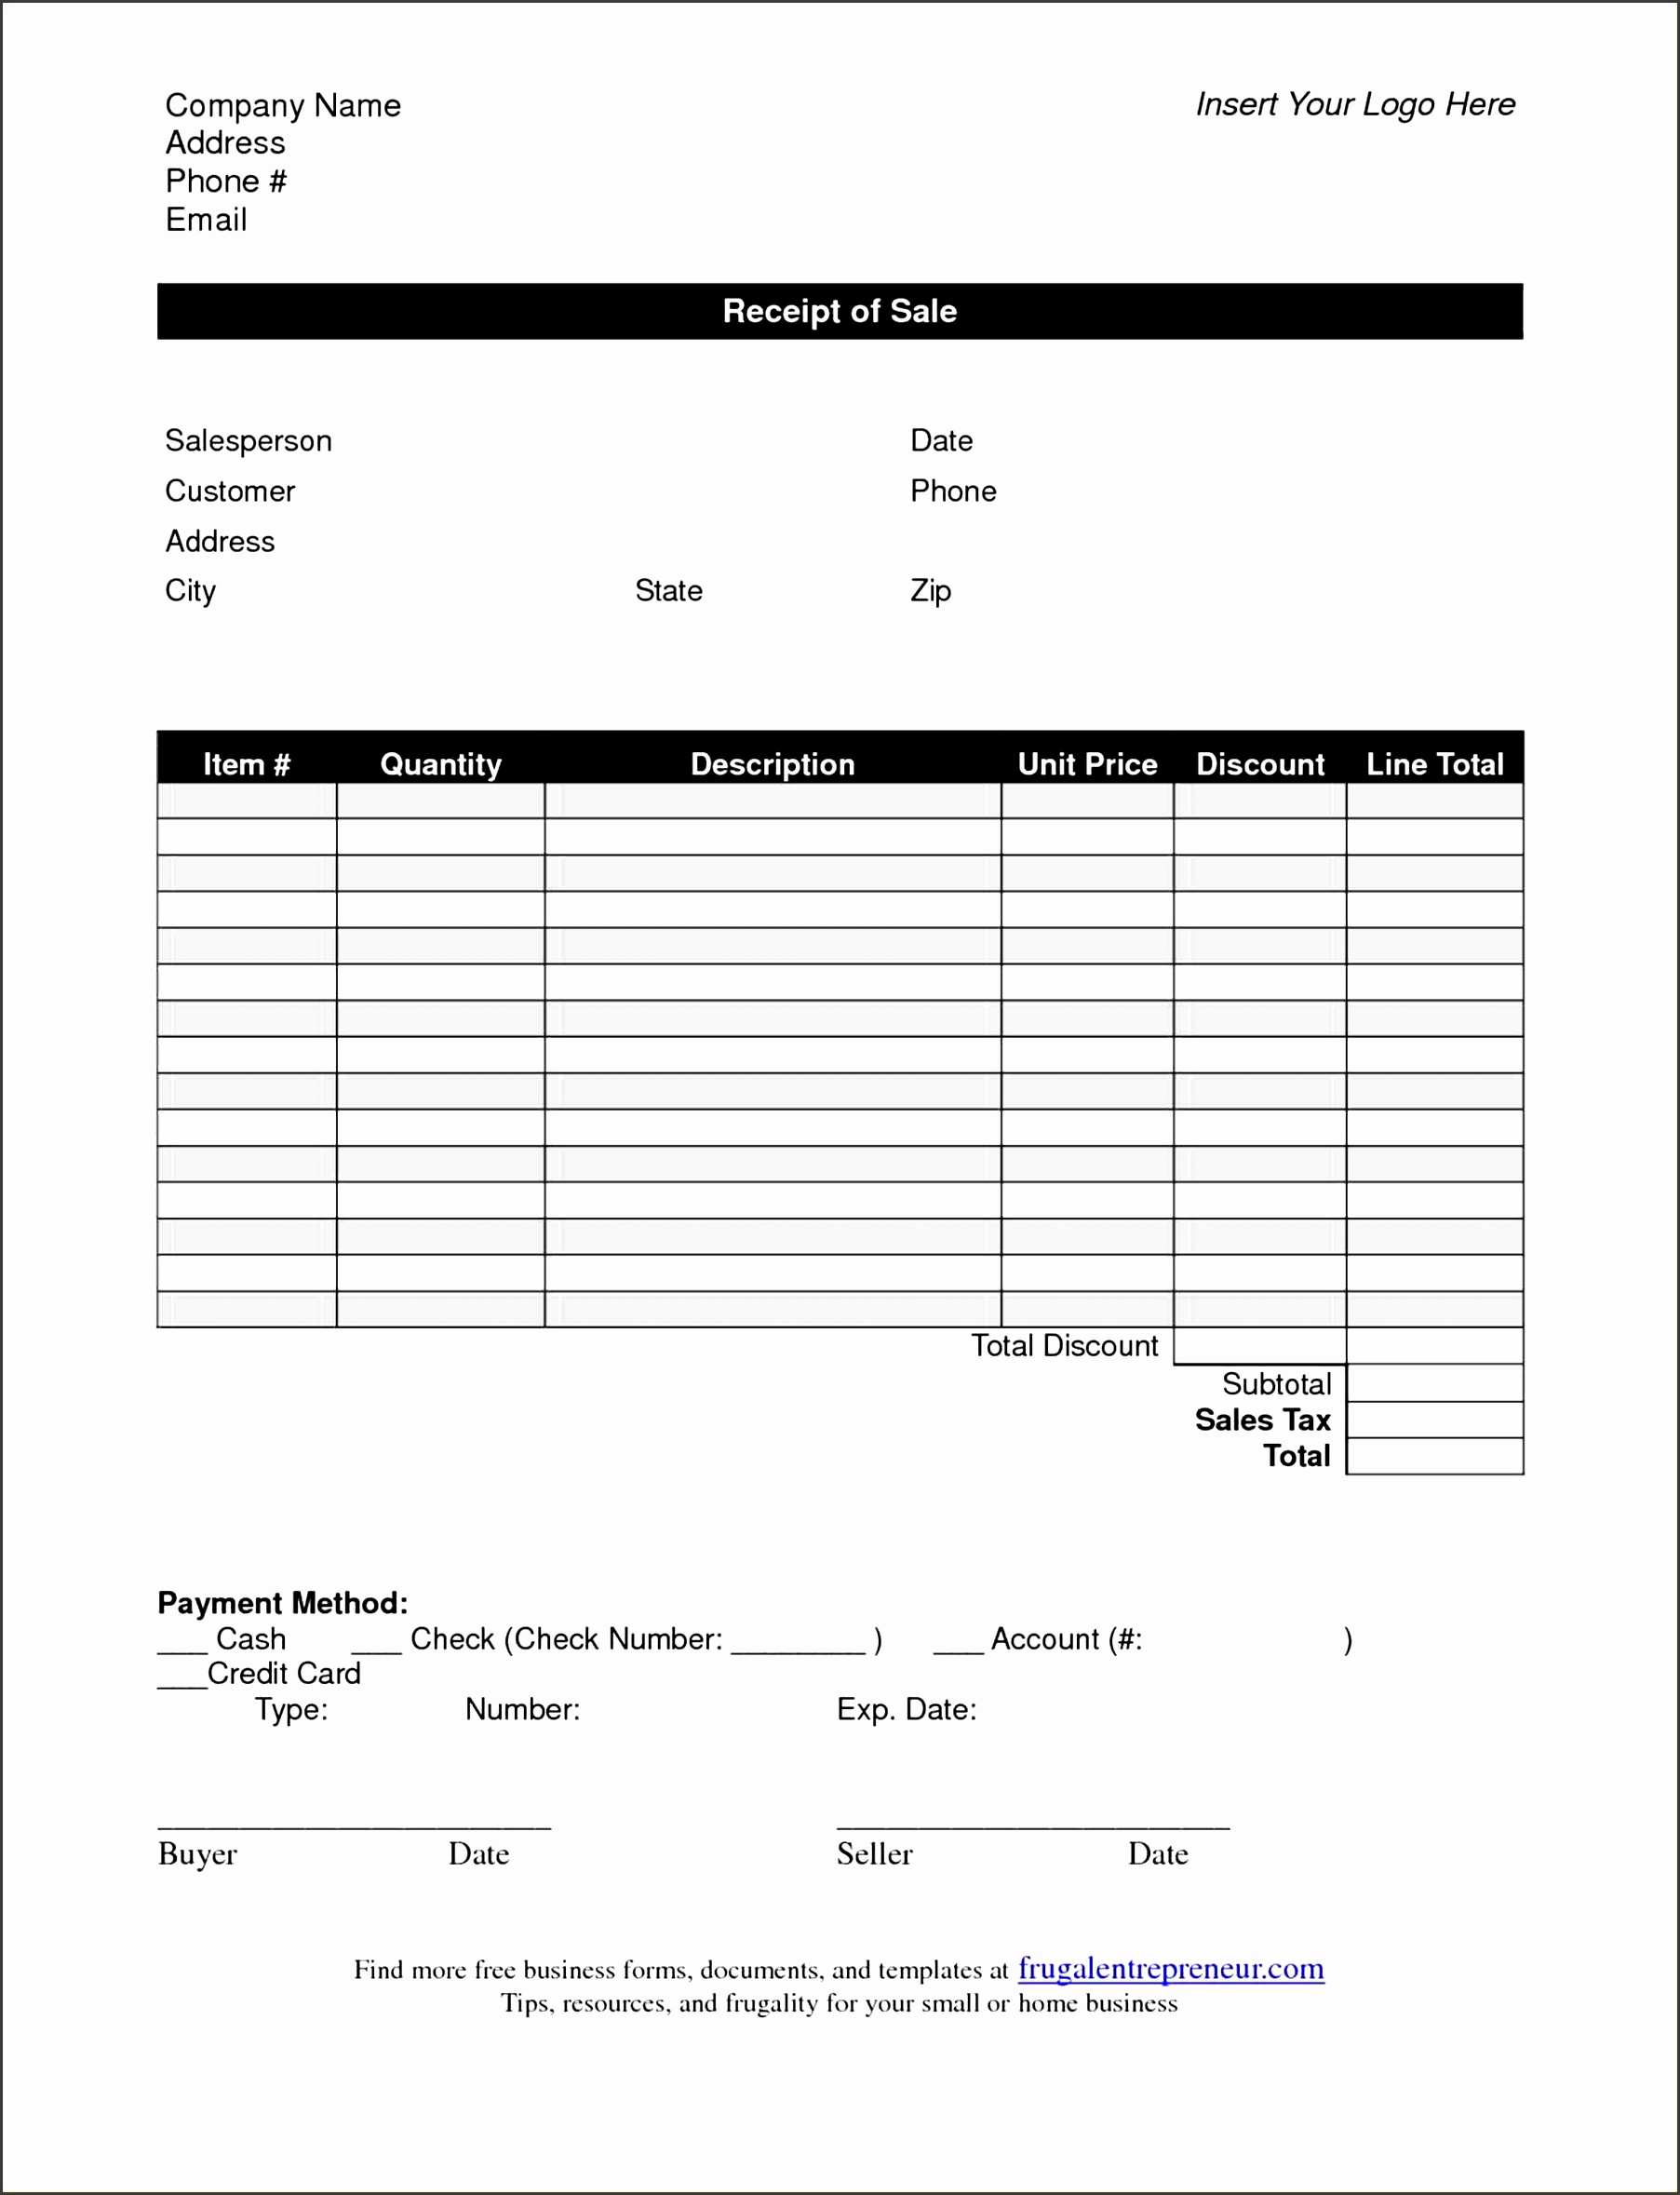 Blank Invoice Receipt Template Free